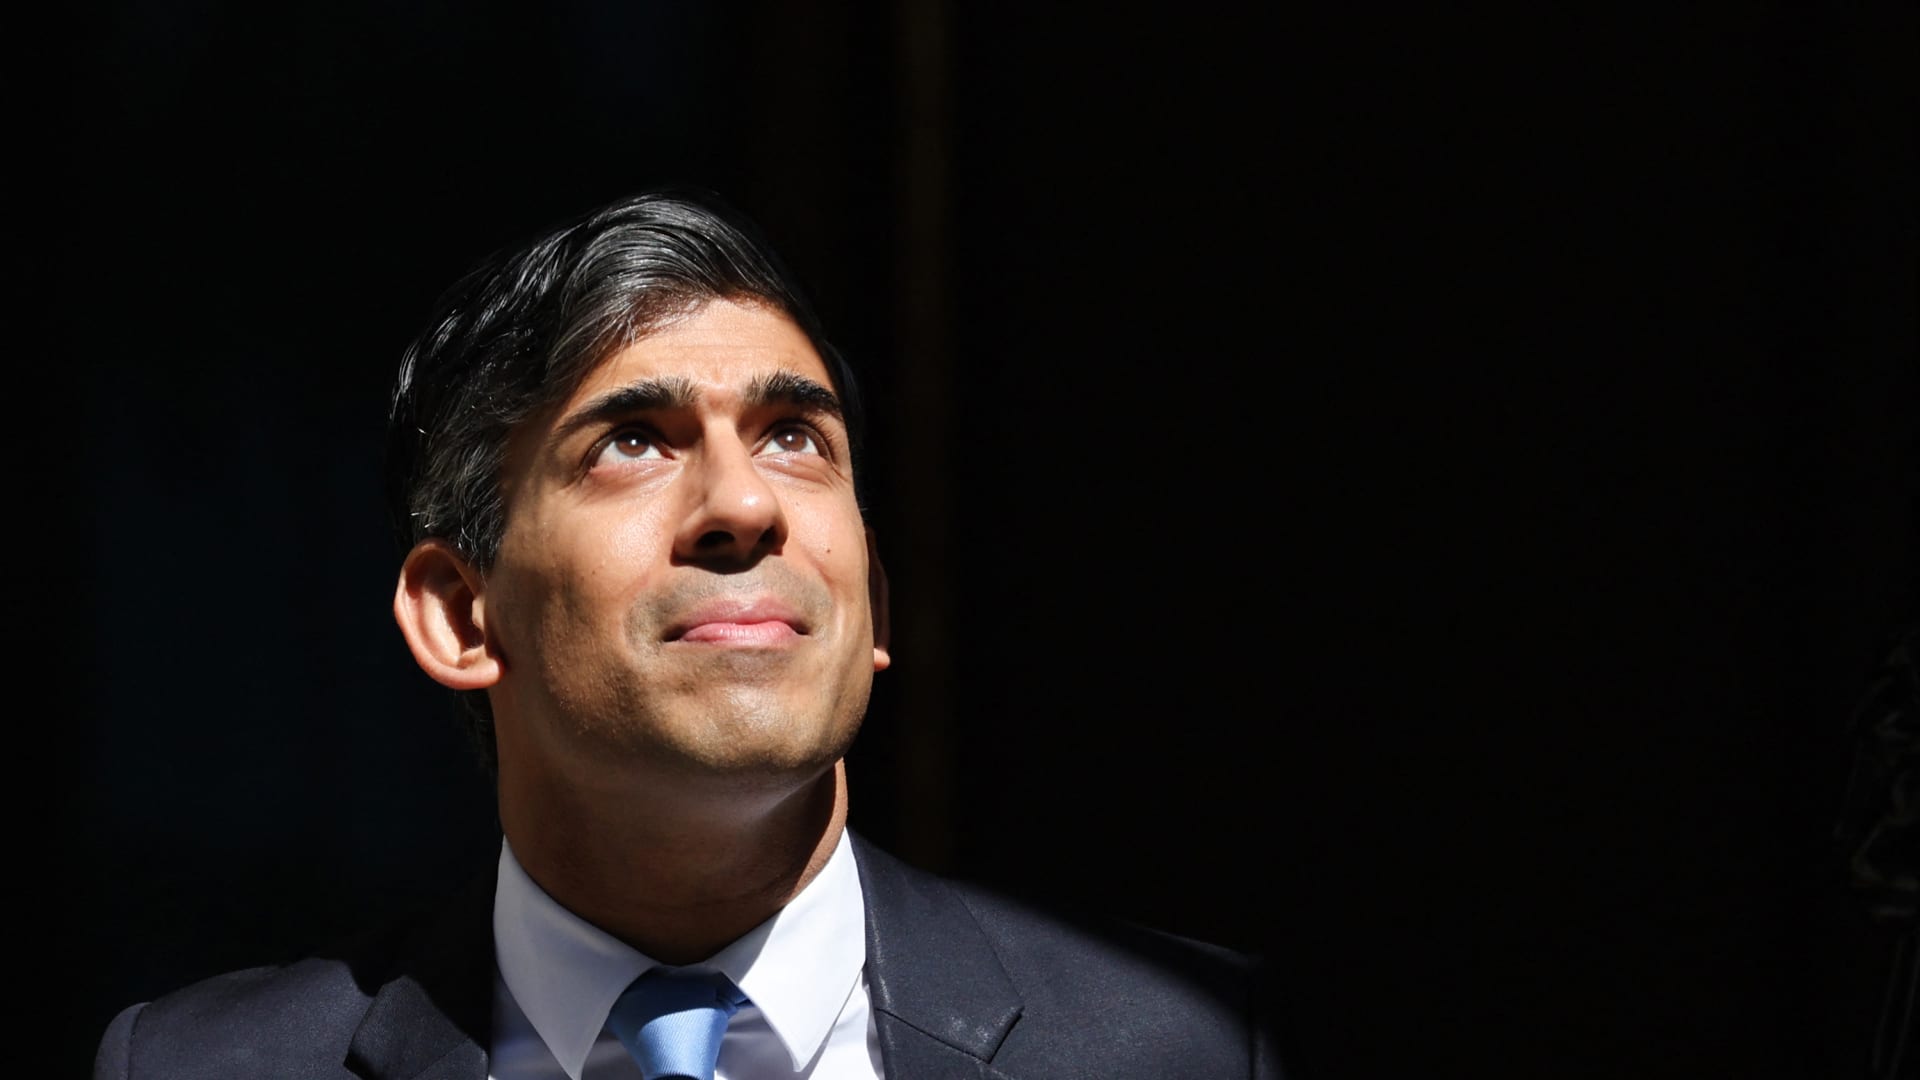 Rishi Sunak warns Britain is at a crossroads ahead of general election